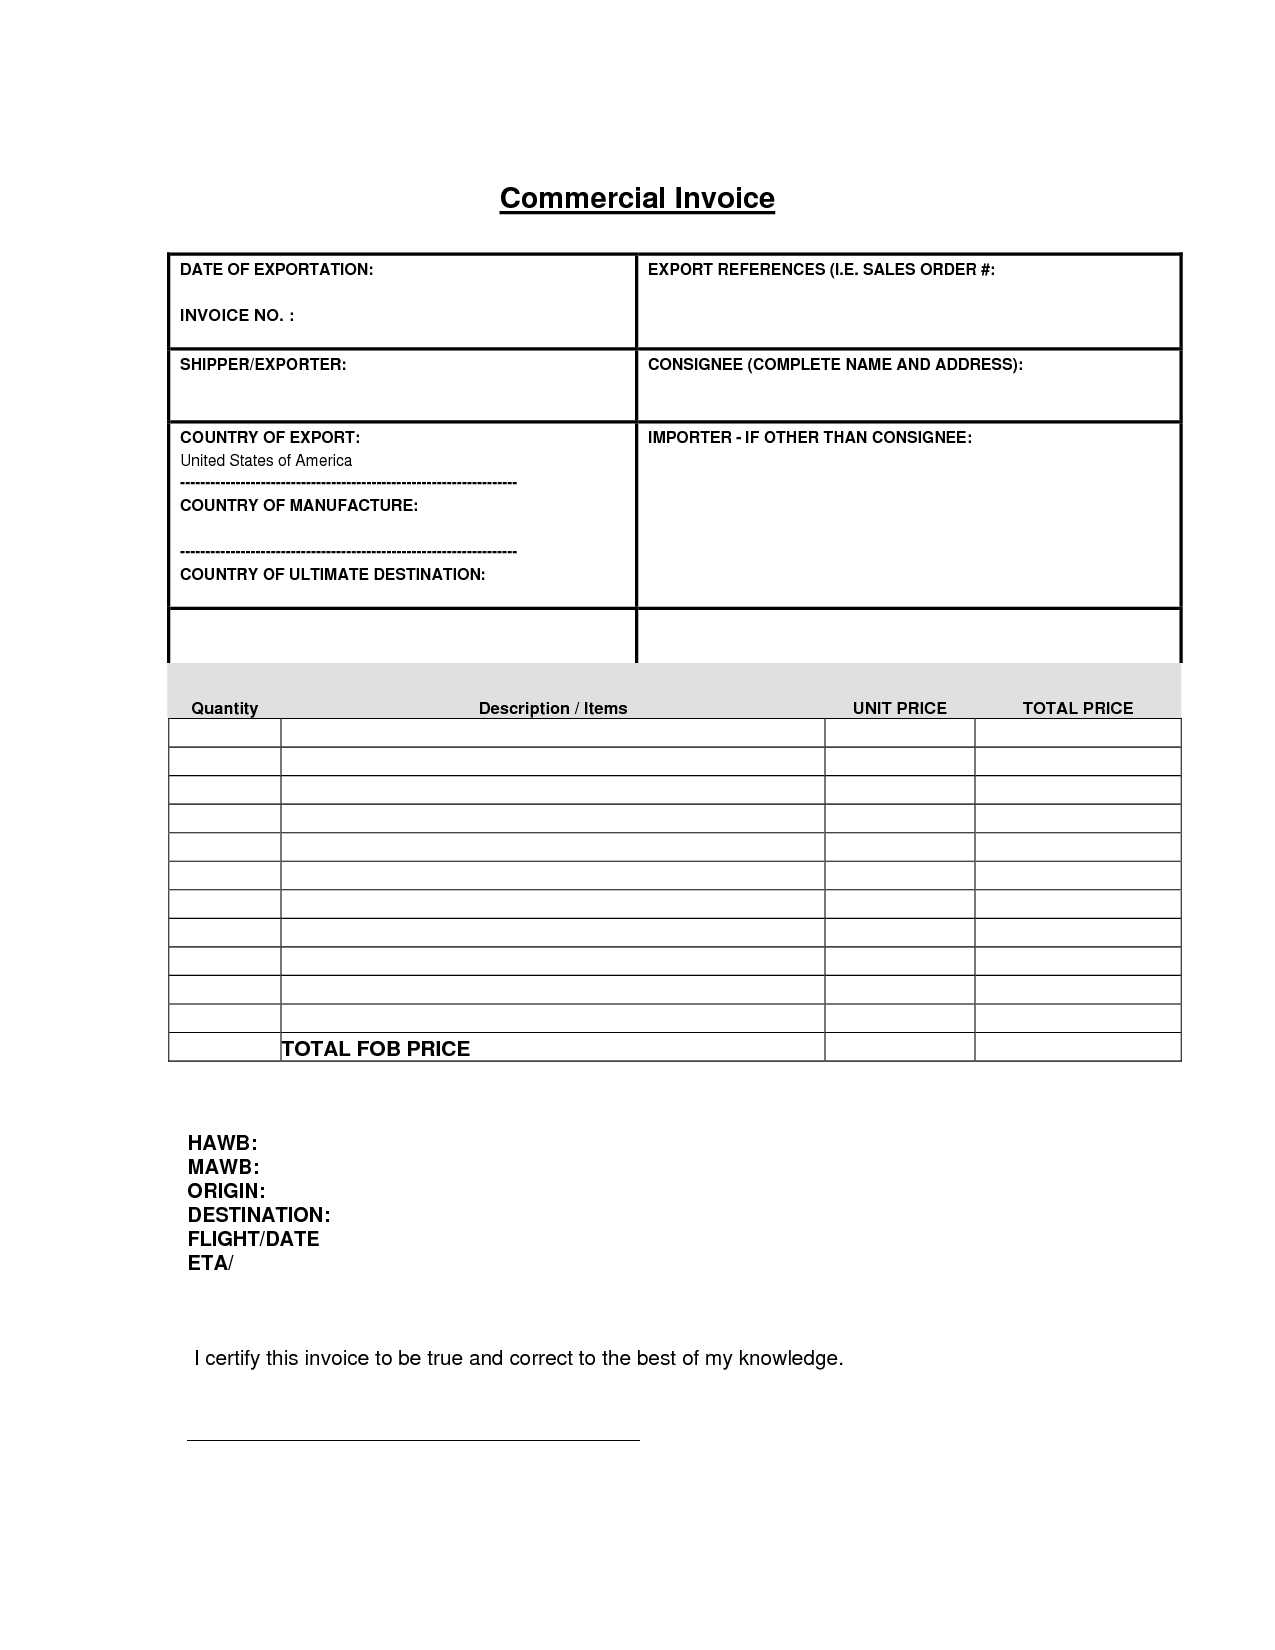 Commercial Invoice Template Invoice Example With Customs Commercial